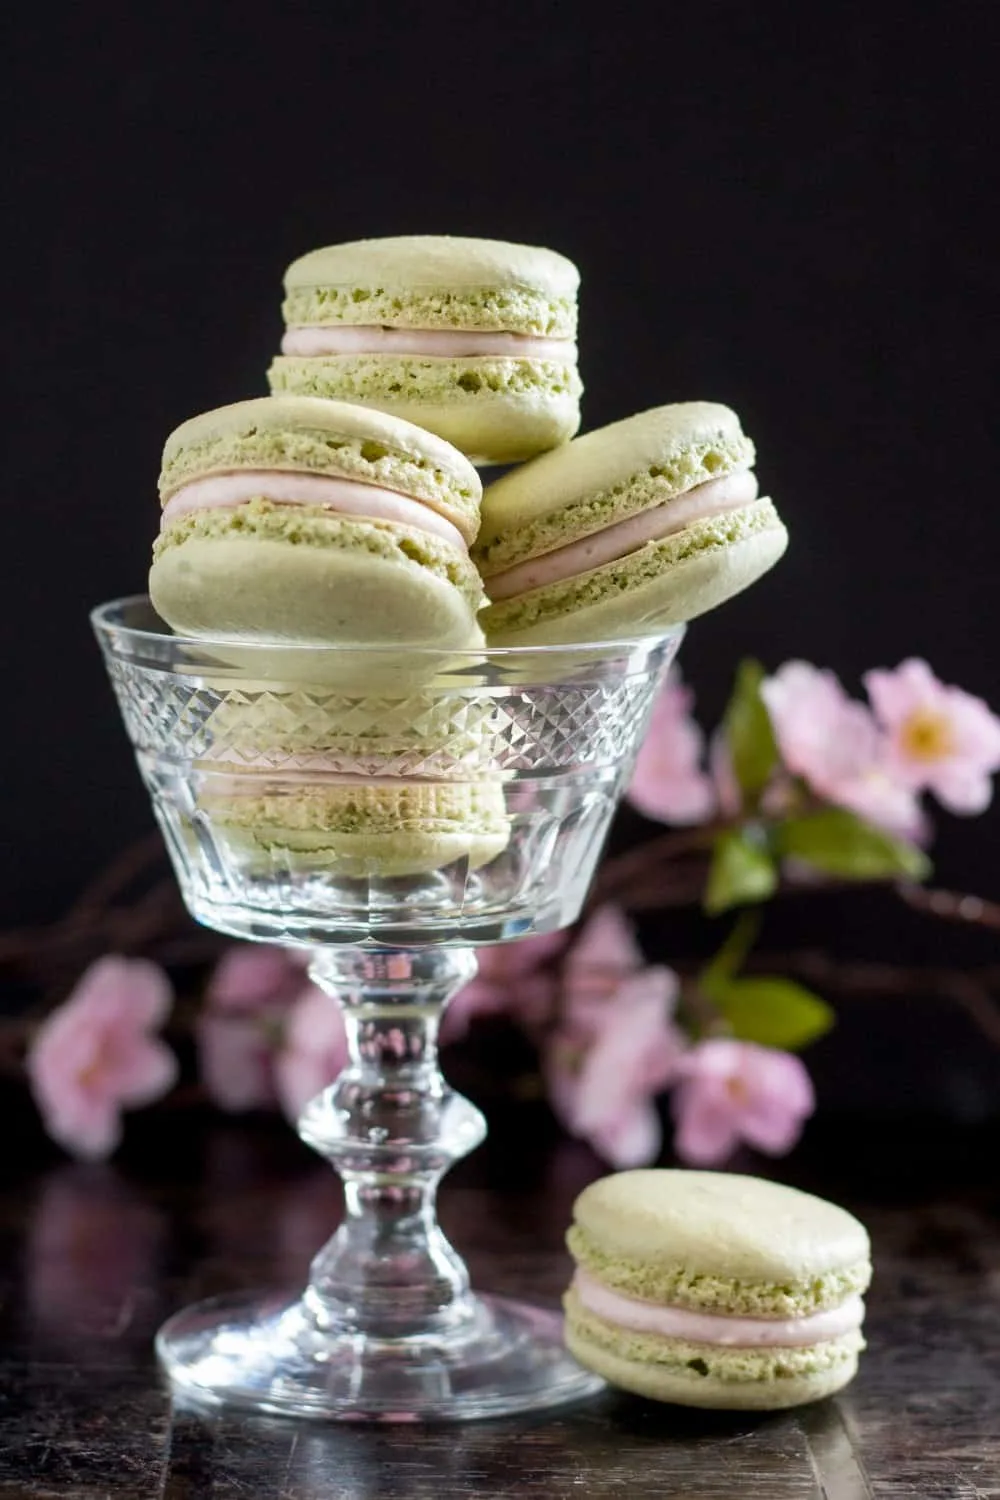 Cherry matcha macarons - delicately flavored, a lovely recipe to celebrate spring! * GoodieGodmother.com